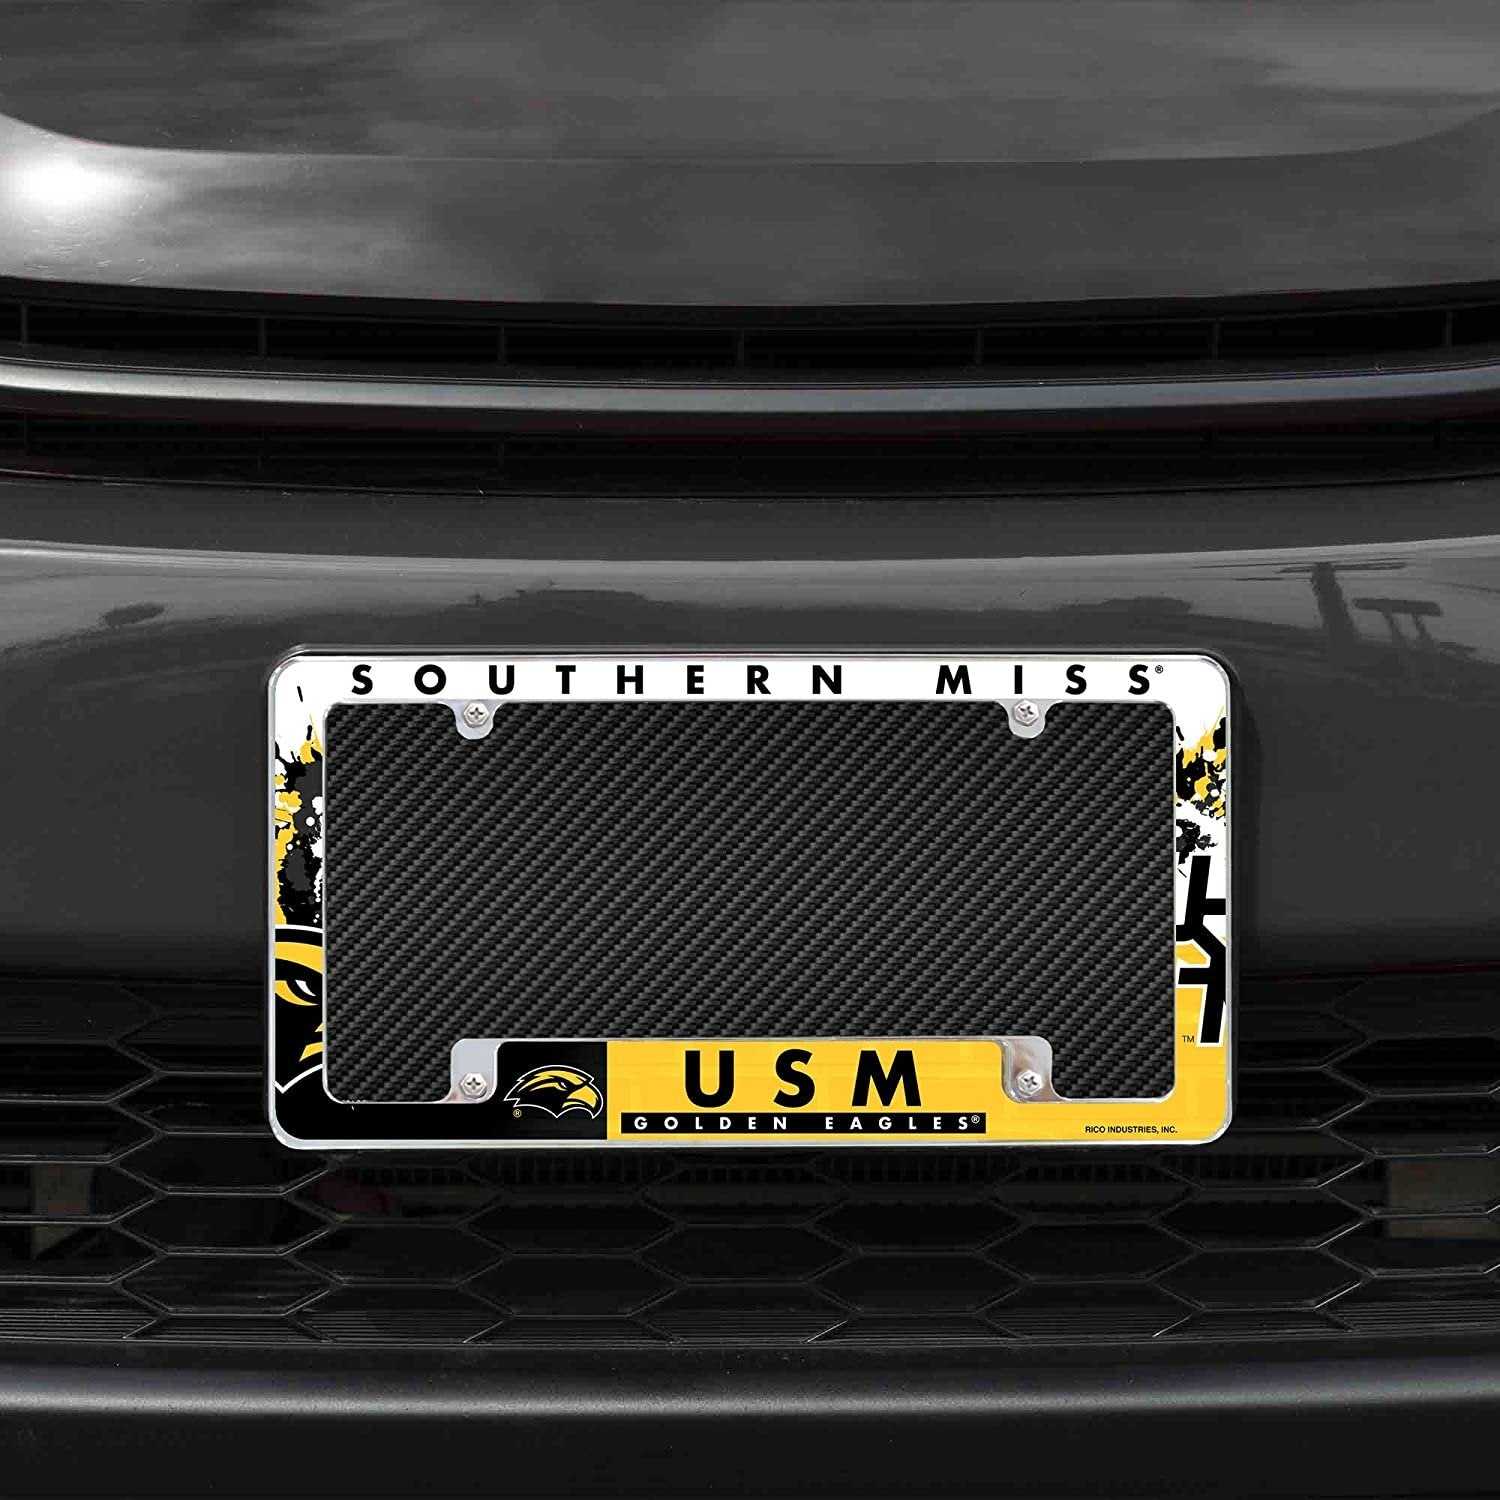 University of Southern Mississippi Golden Eagles Metal License Plate Frame Tag Cover All Over Design 12x6 Inch